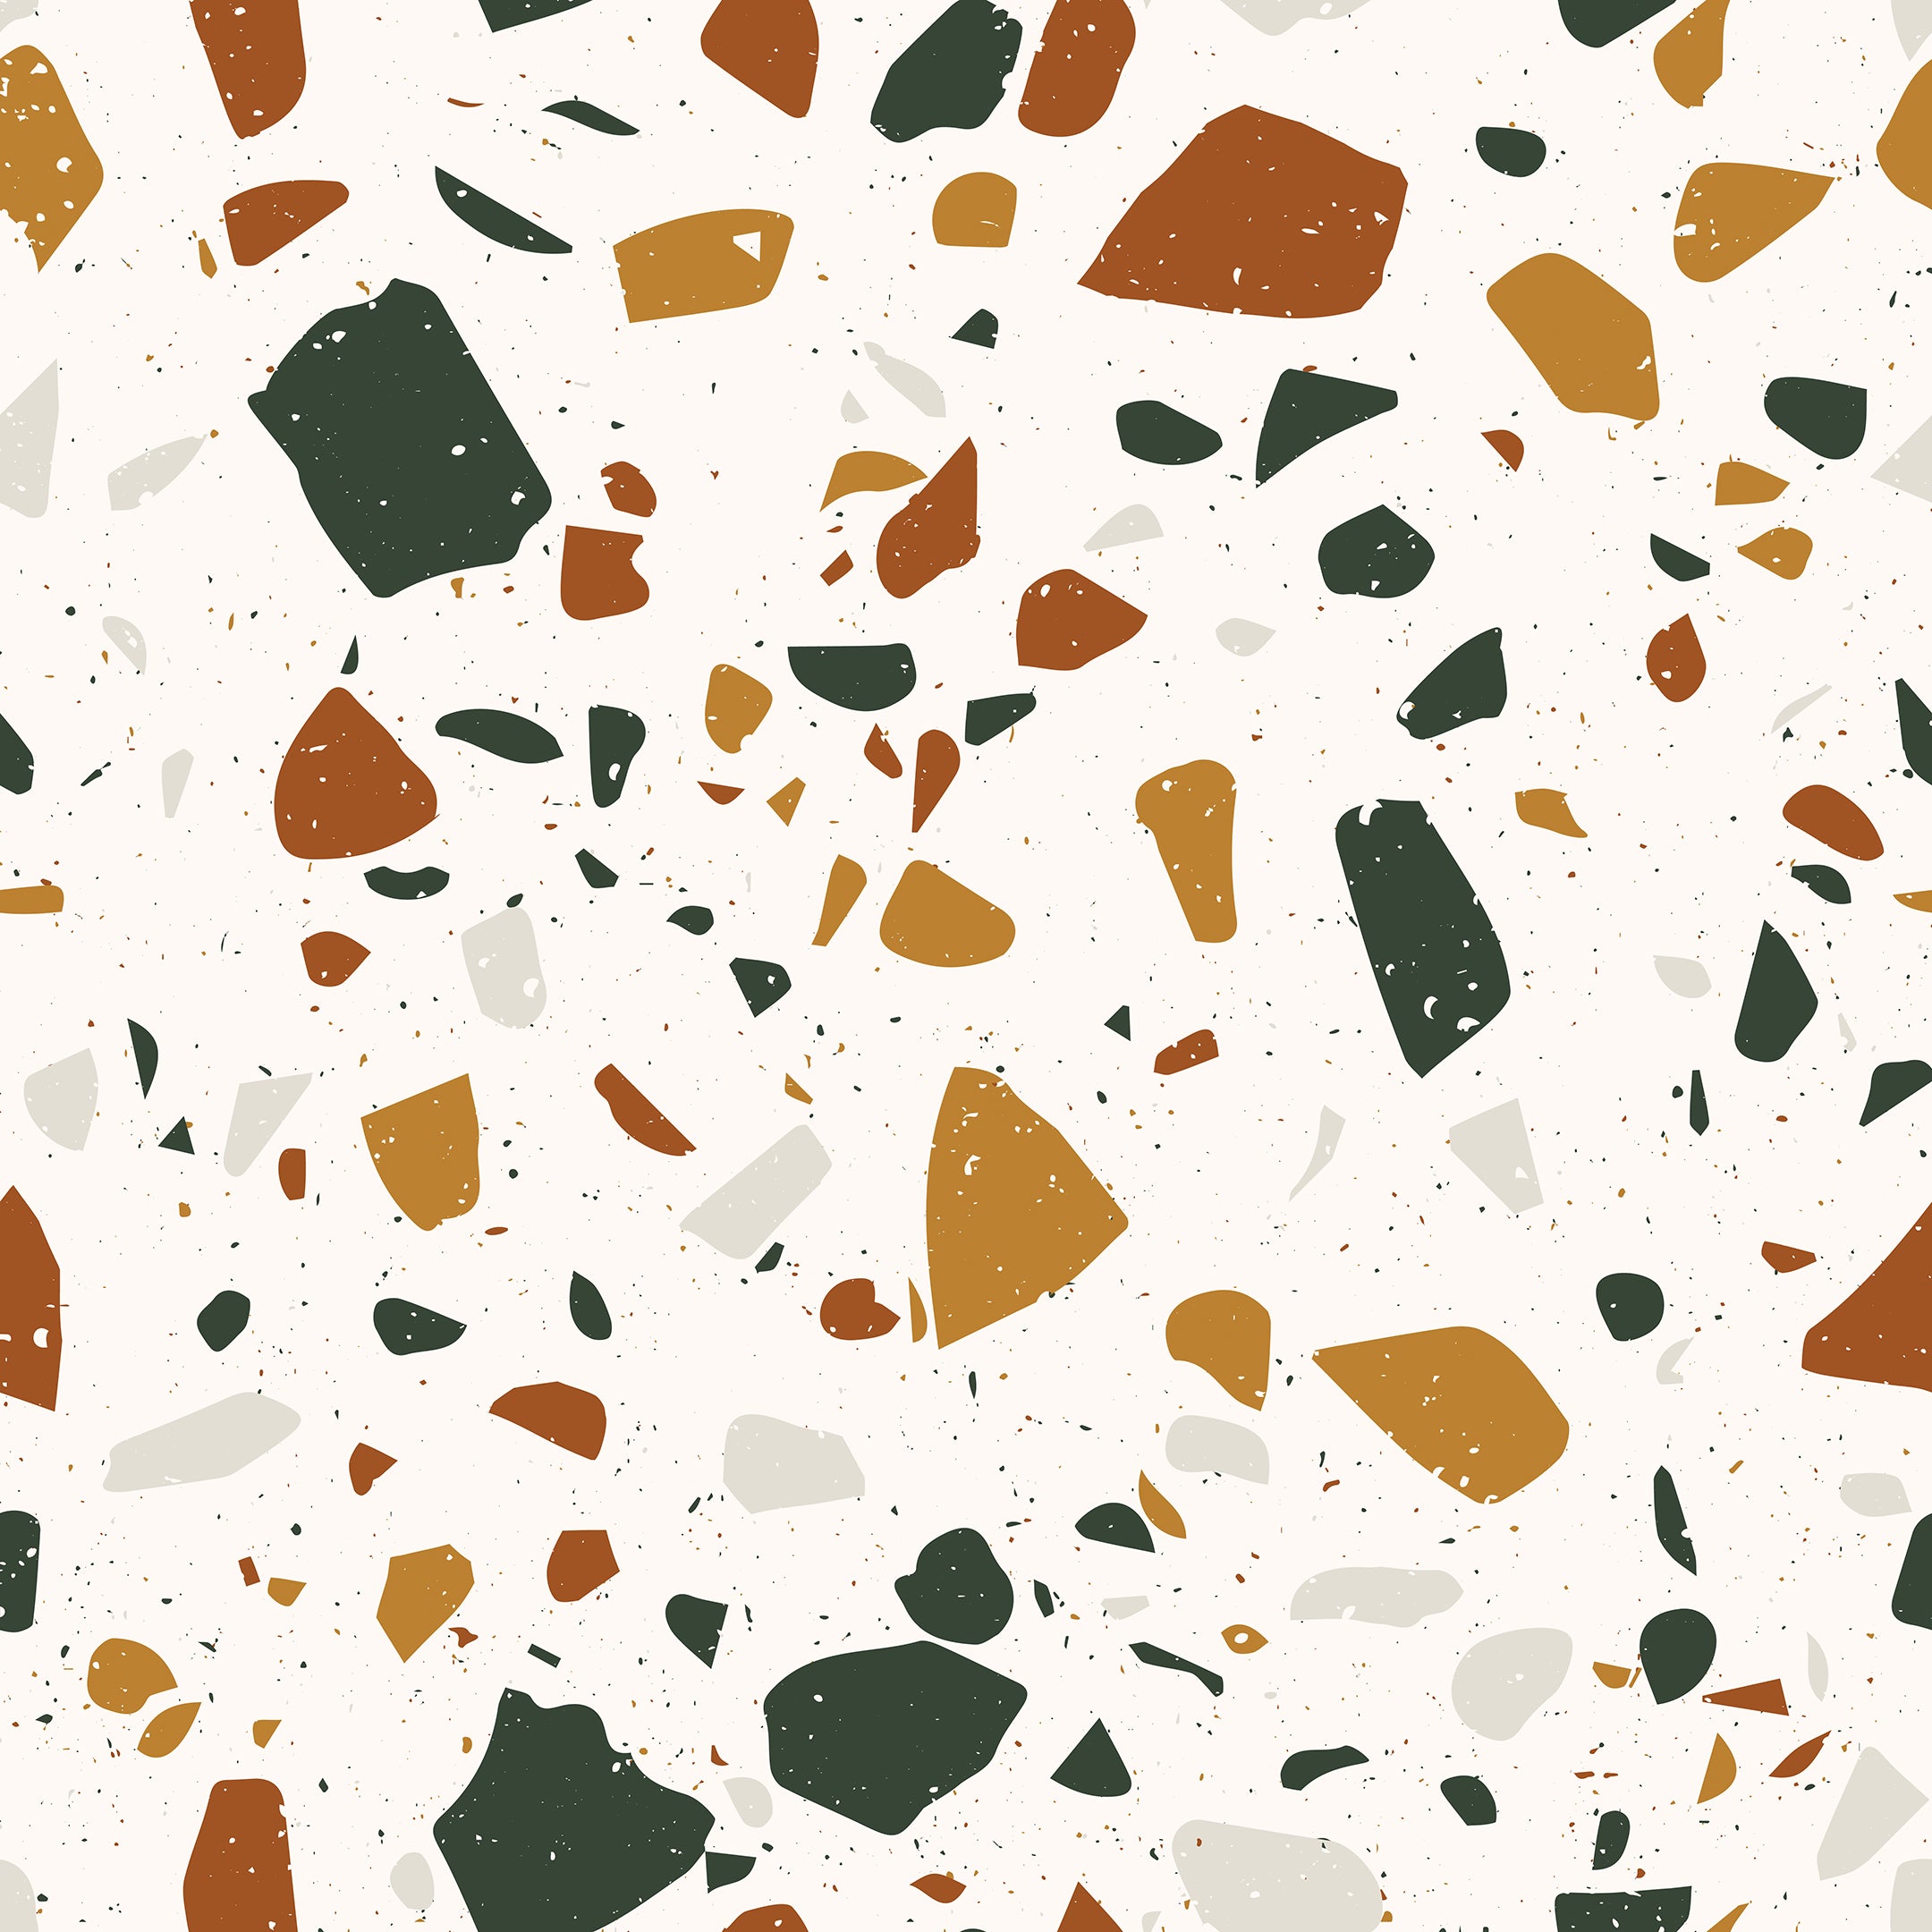 A close-up view of the Earthy Terrazzo wallpaper pattern, featuring a lively assortment of irregularly shaped fragments in muted tones of orange, green, and gray against a creamy background, ideal for a modern and naturalistic aesthetic.